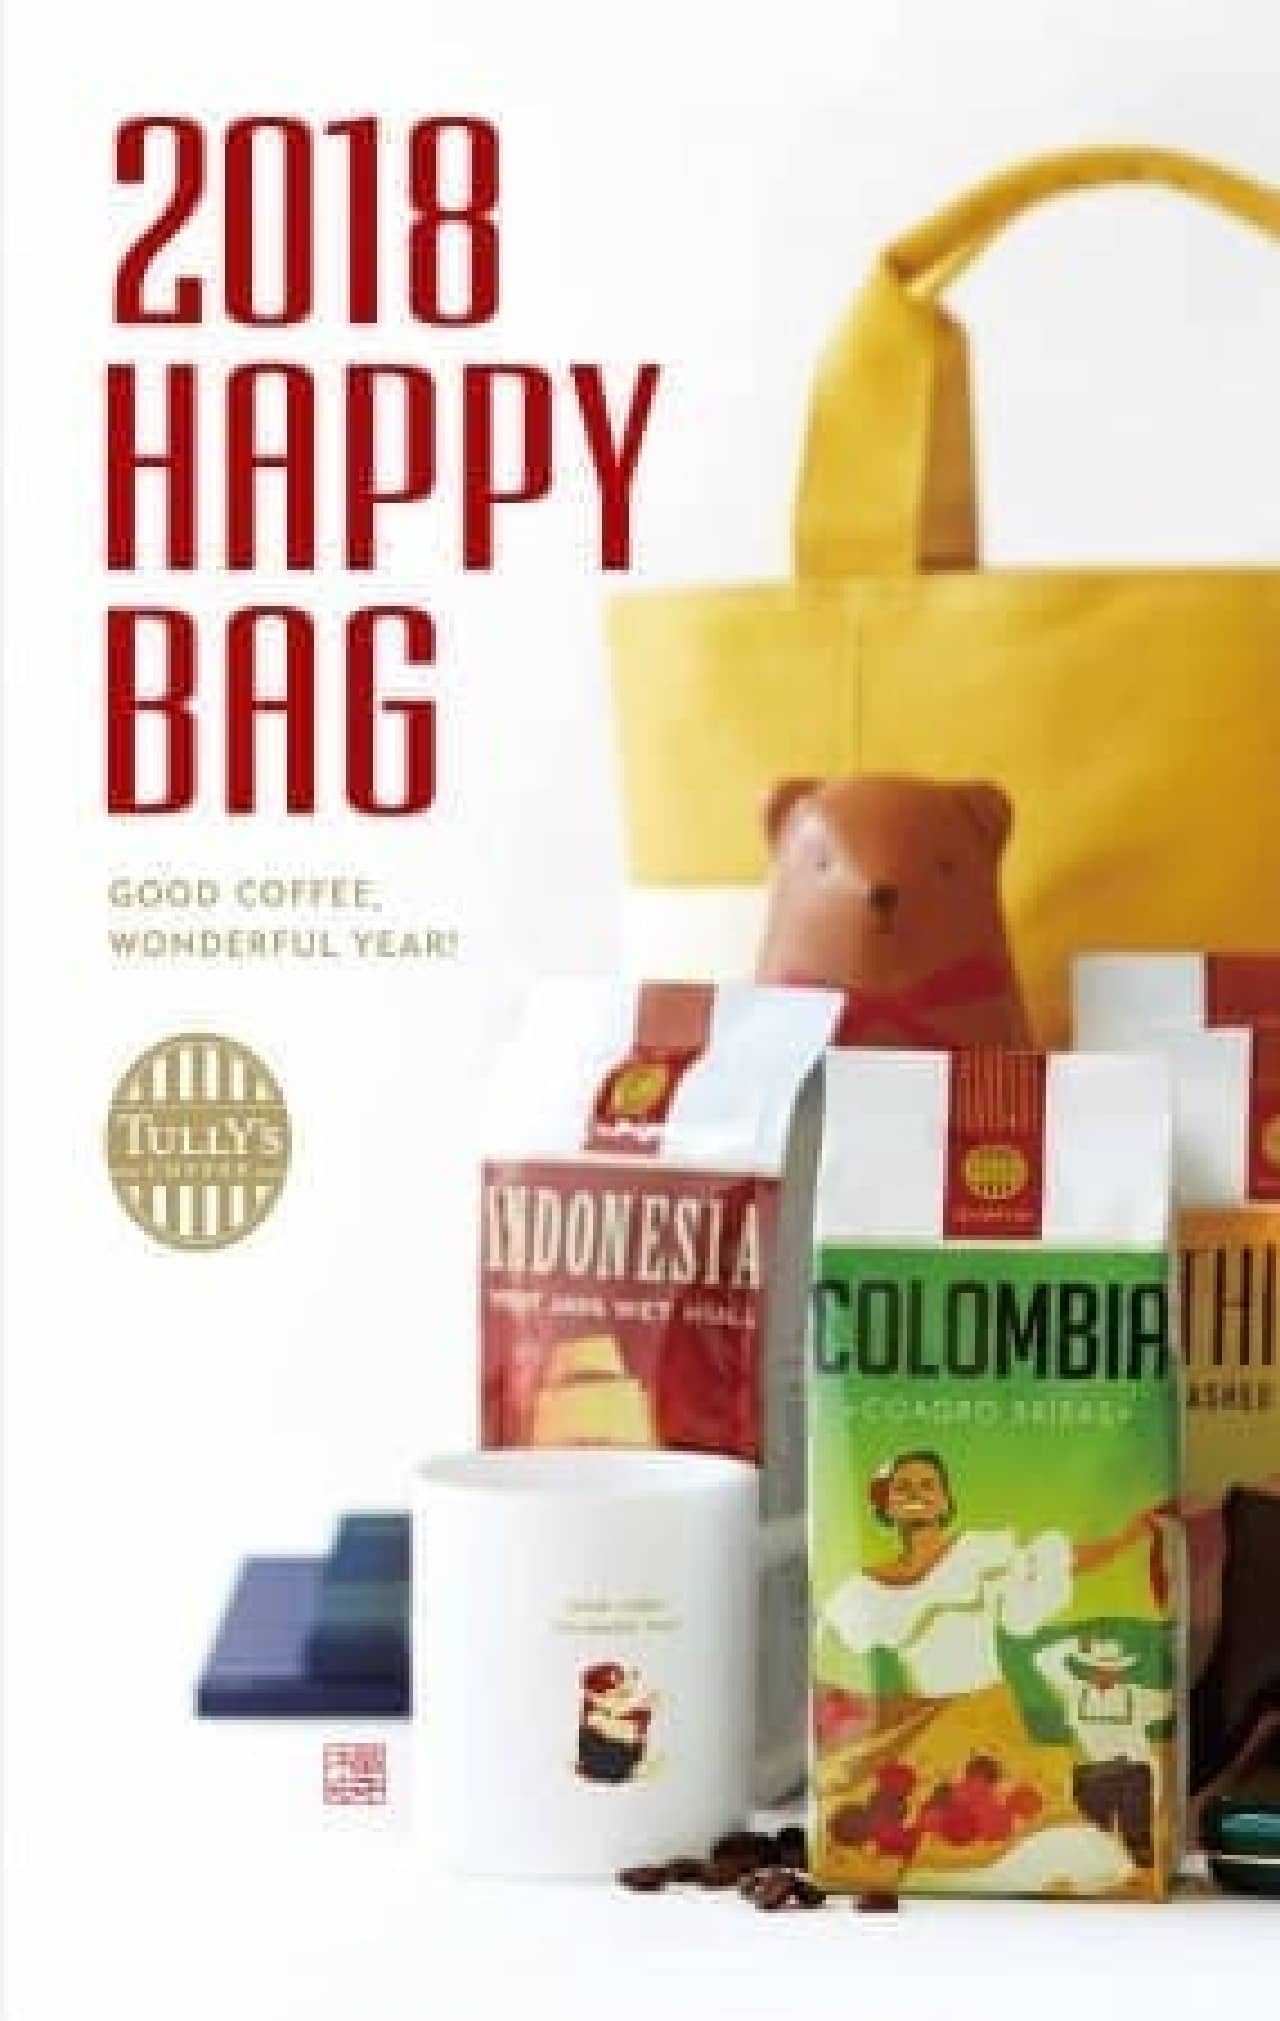 Tully's Coffee Lucky Bag `` 2018 HAPPY BAG''